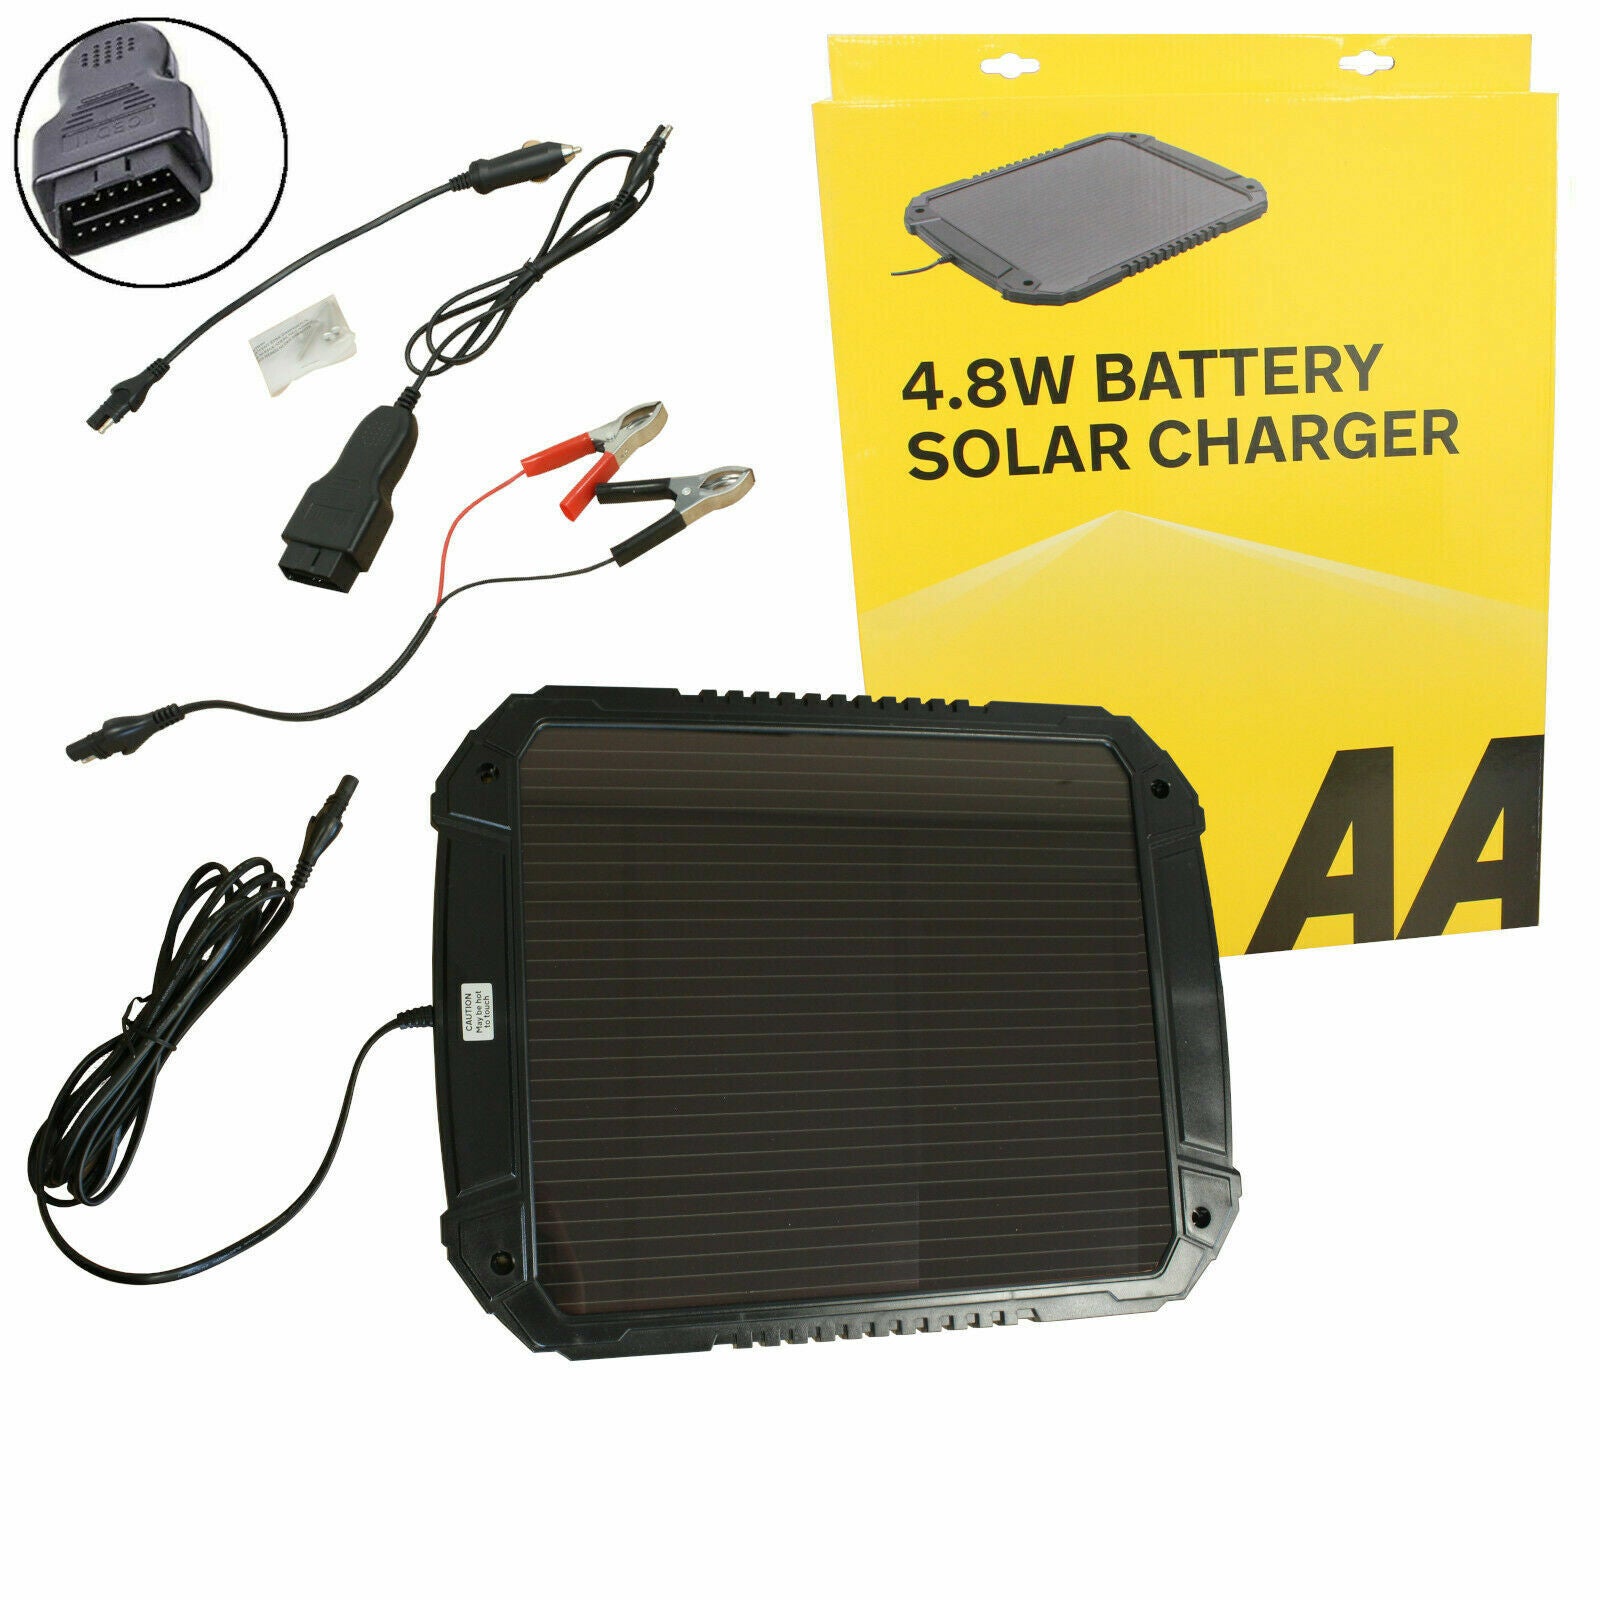 AA 4.8W Battery Solar Charger